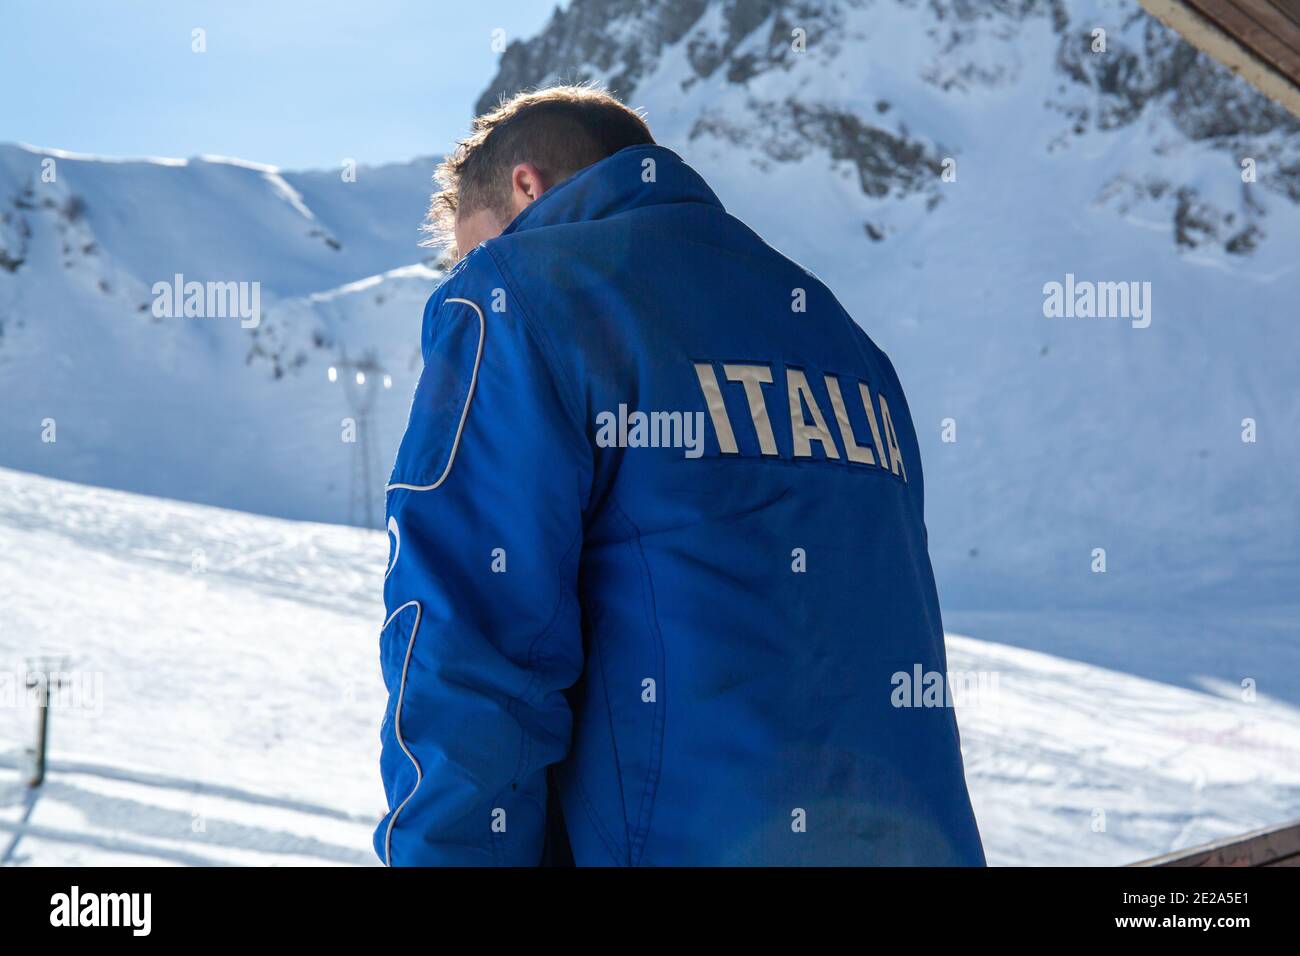 Italian Alps and an Italian ski instructor. Ski slopes are closed and empty due to the Coronavirus pandemic.Mountain tourism business crisis. Stock Photo